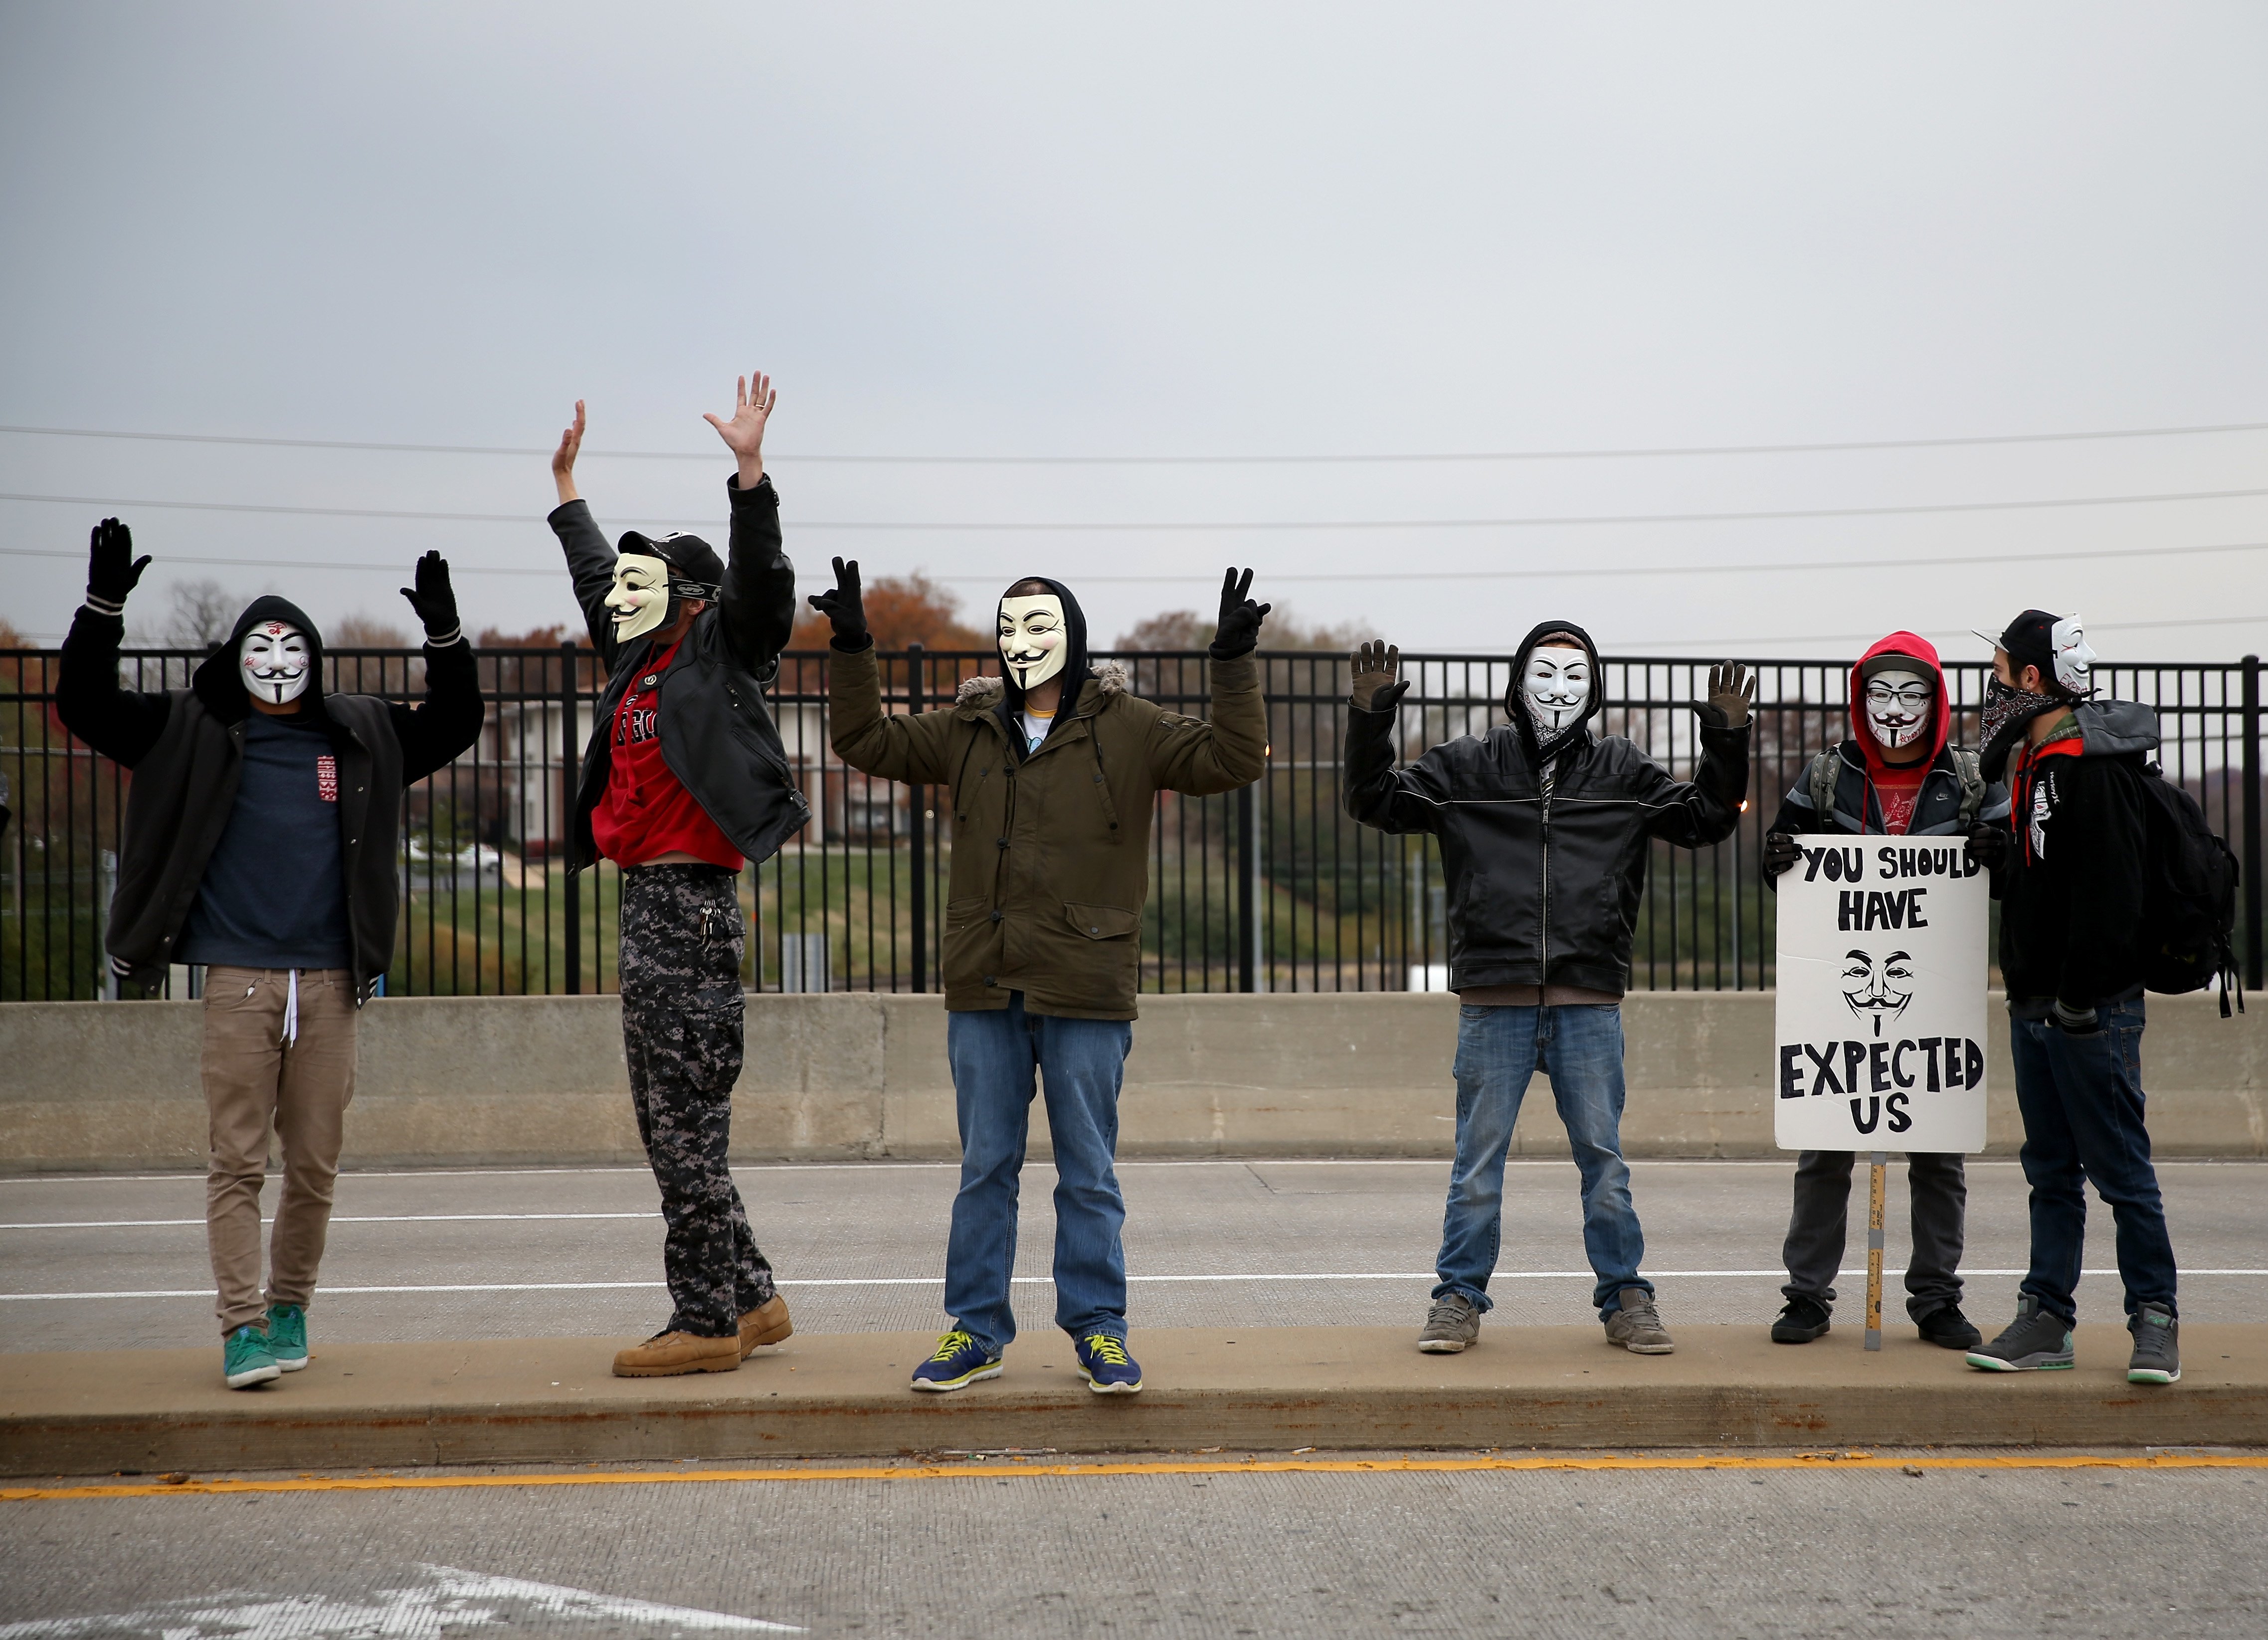 Demonstrators yell "Hands Up, Don't Shoot" alongside a highway overpass to voice their opinions as the area awaits a grand jury decision on Nov. 15, 2014 near Ferguson, Missouri. (Joe Raedle—`Getty Images)